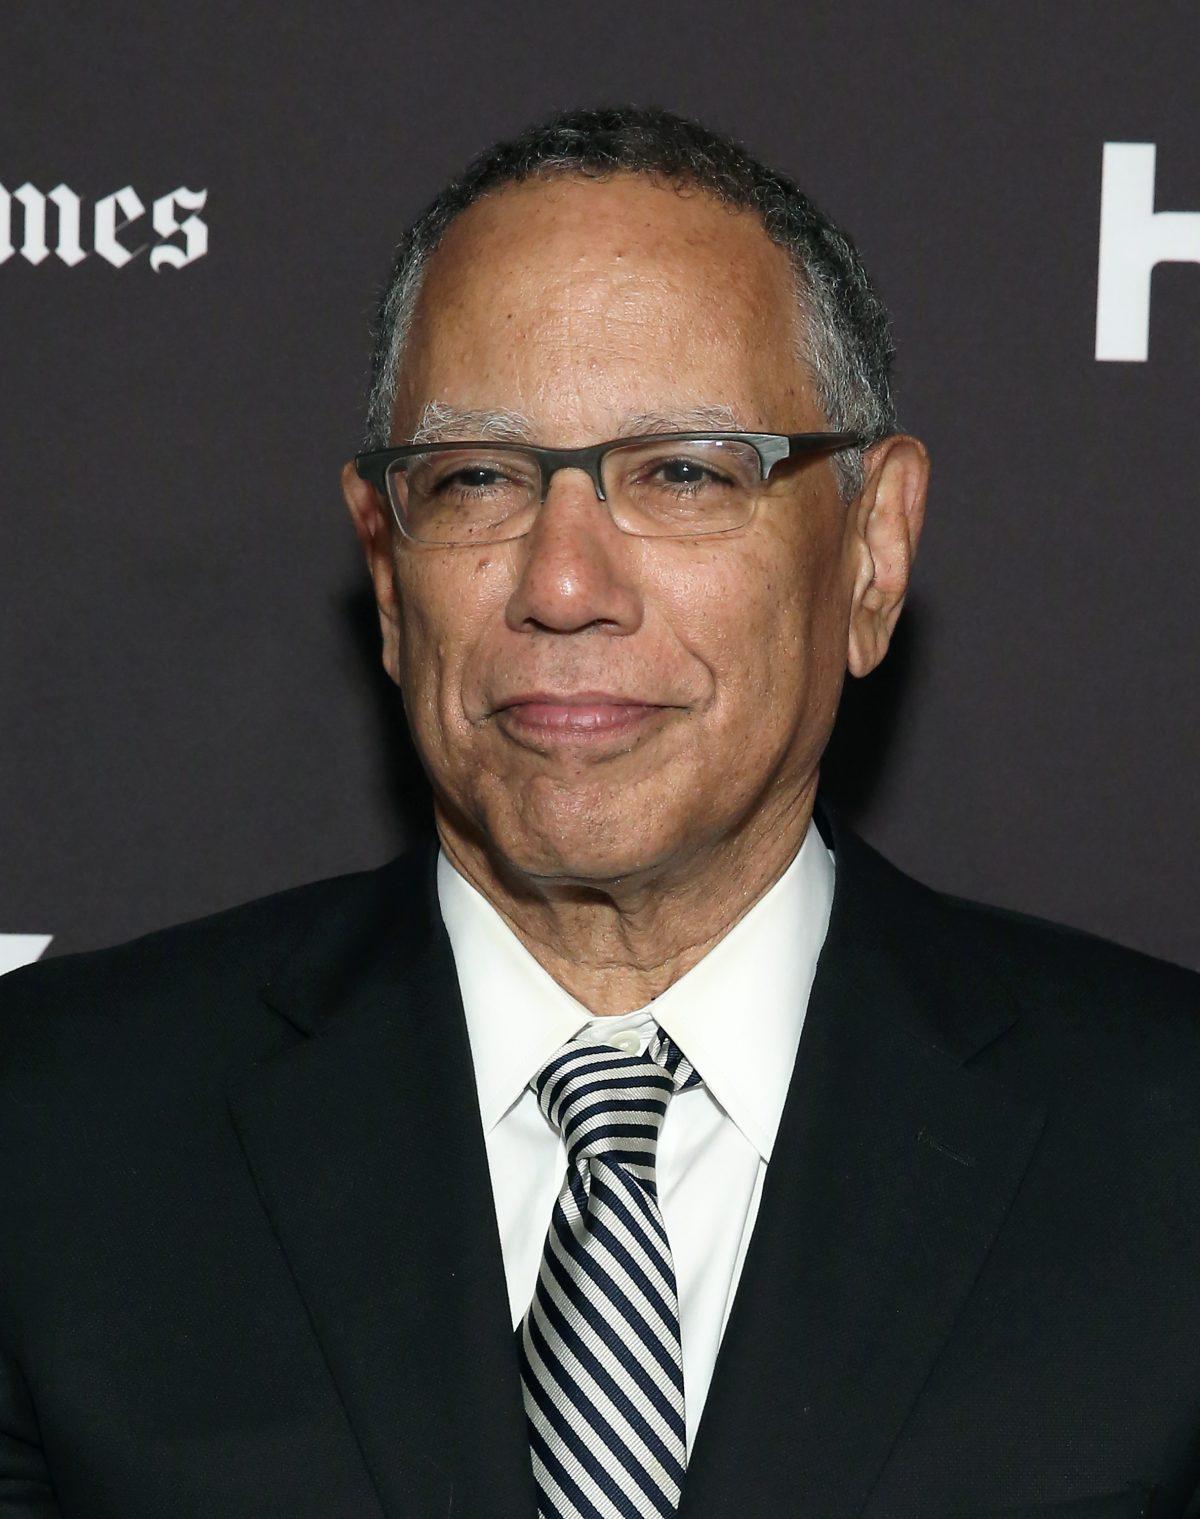 Dean Baquet attends "The Weekly" New York Premiere at Florence Gould Hall Theater in New York City on May 15, 2019. (Monica Schipper/Getty Images)